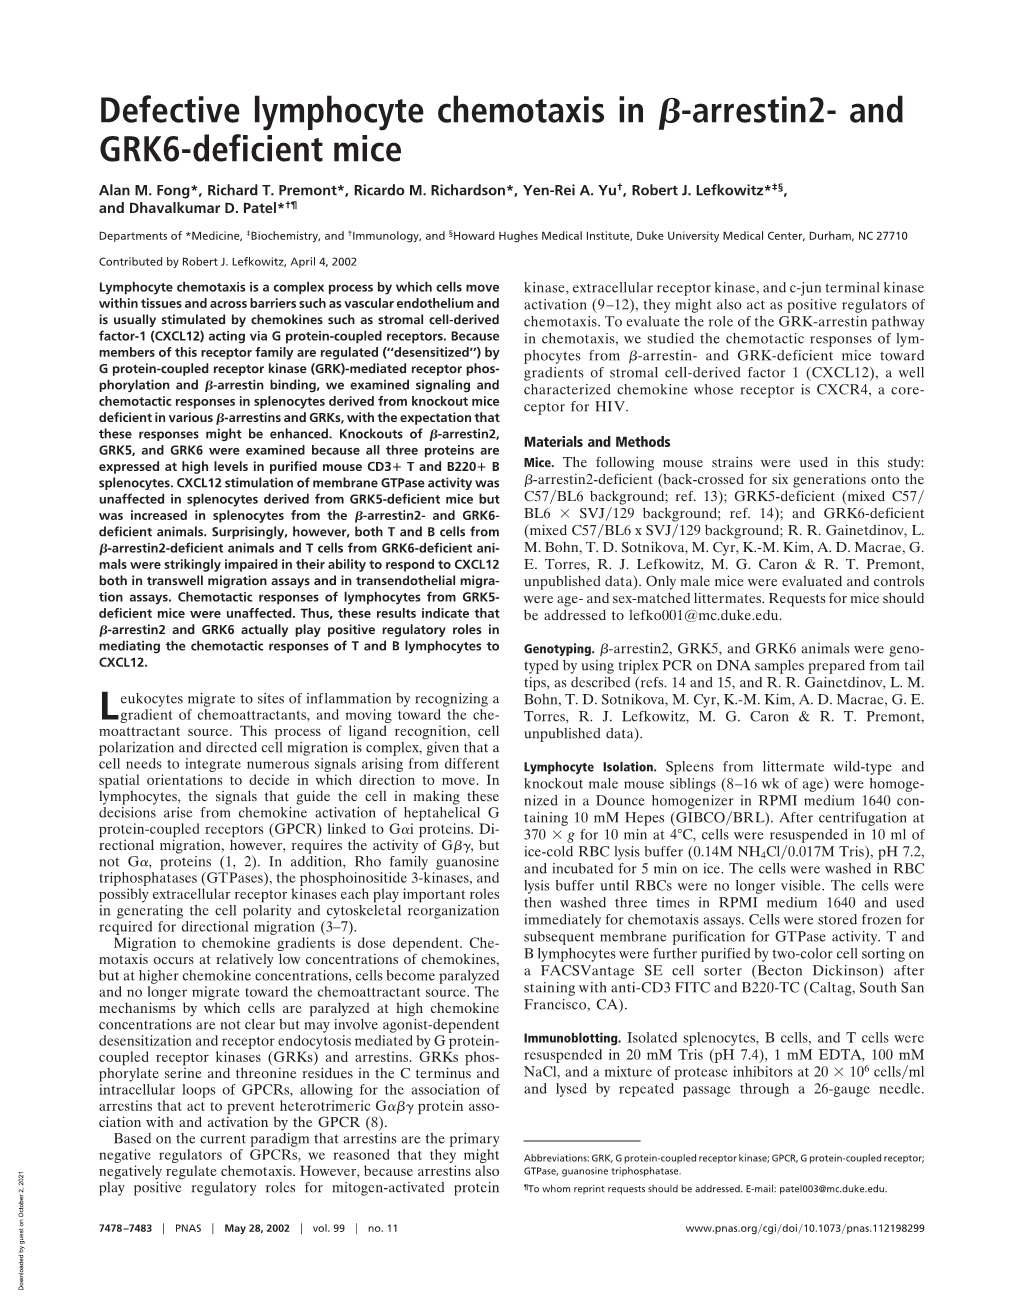 Defective Lymphocyte Chemotaxis in Я-Arrestin2- and GRK6-Deficient Mice